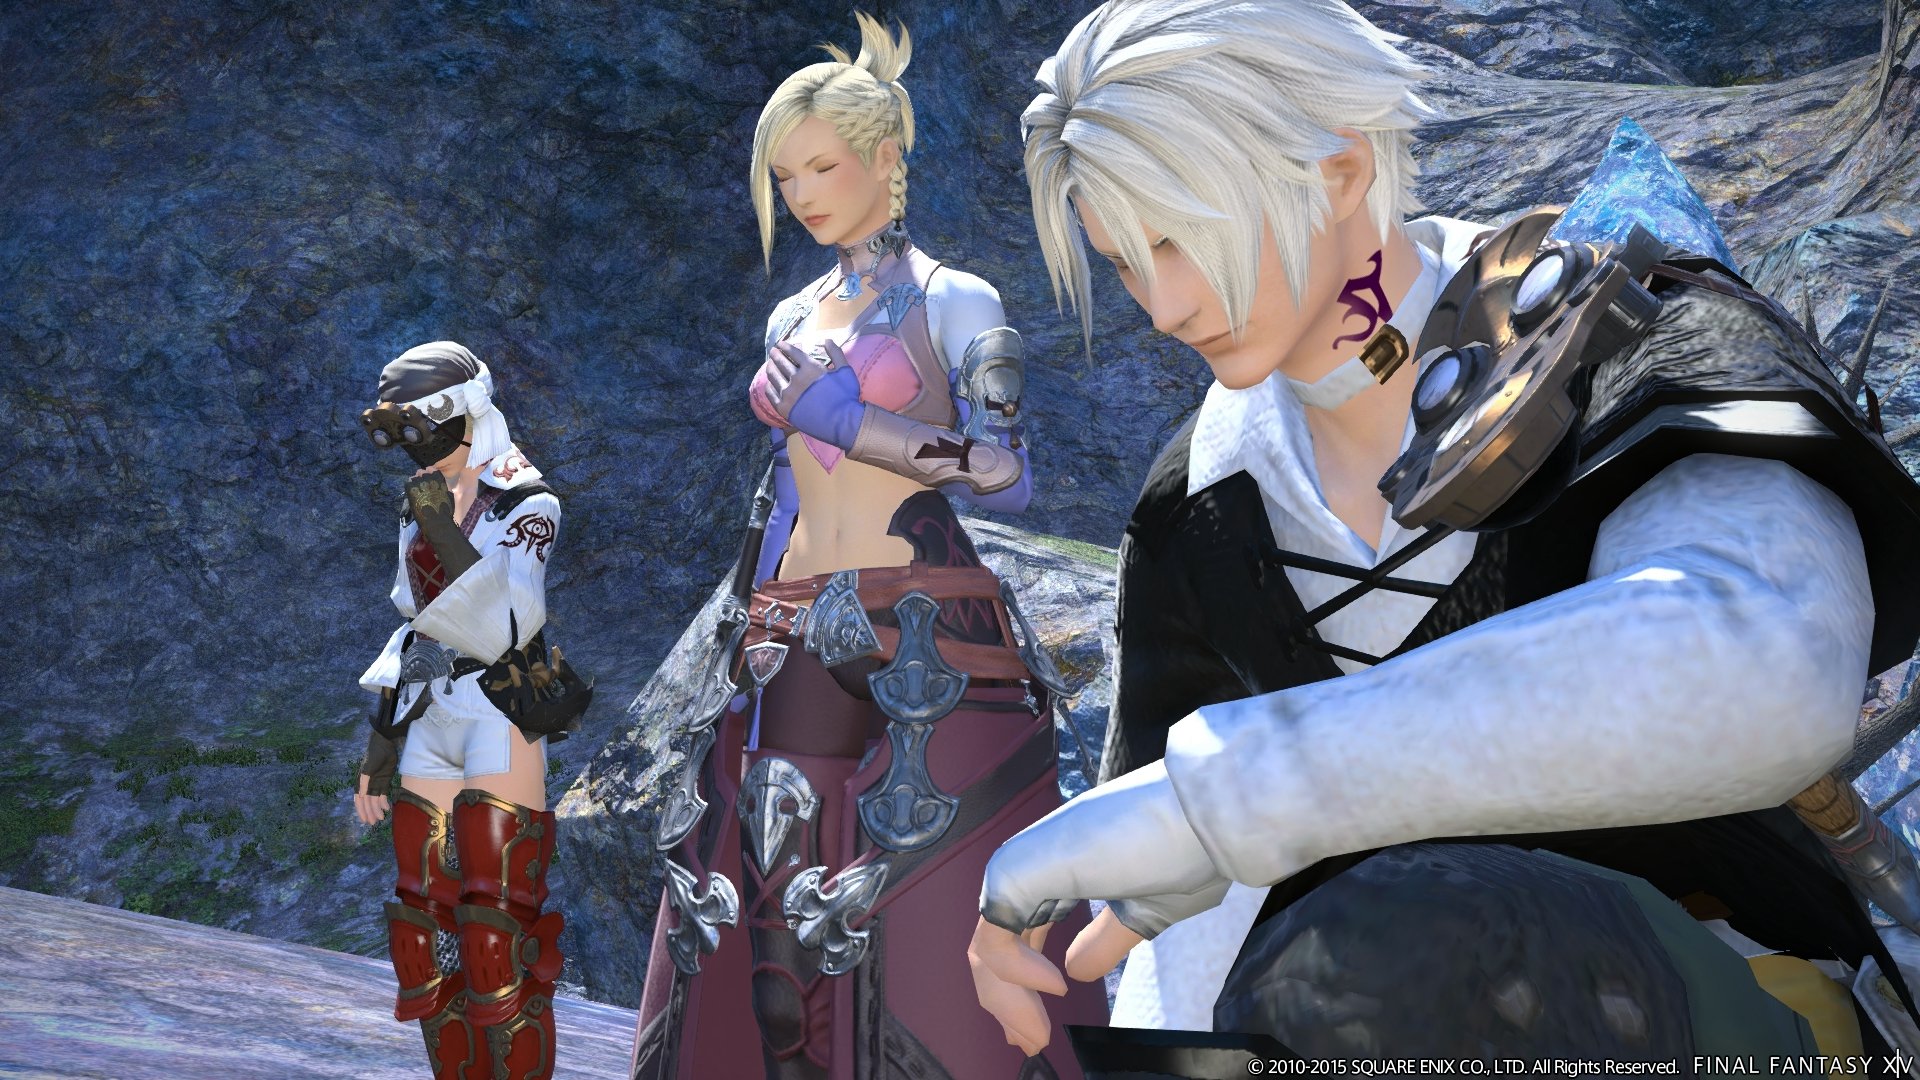 Final Fantasy XIV Patch 2.5 out now, brings World of Darkness, Odin battle ...